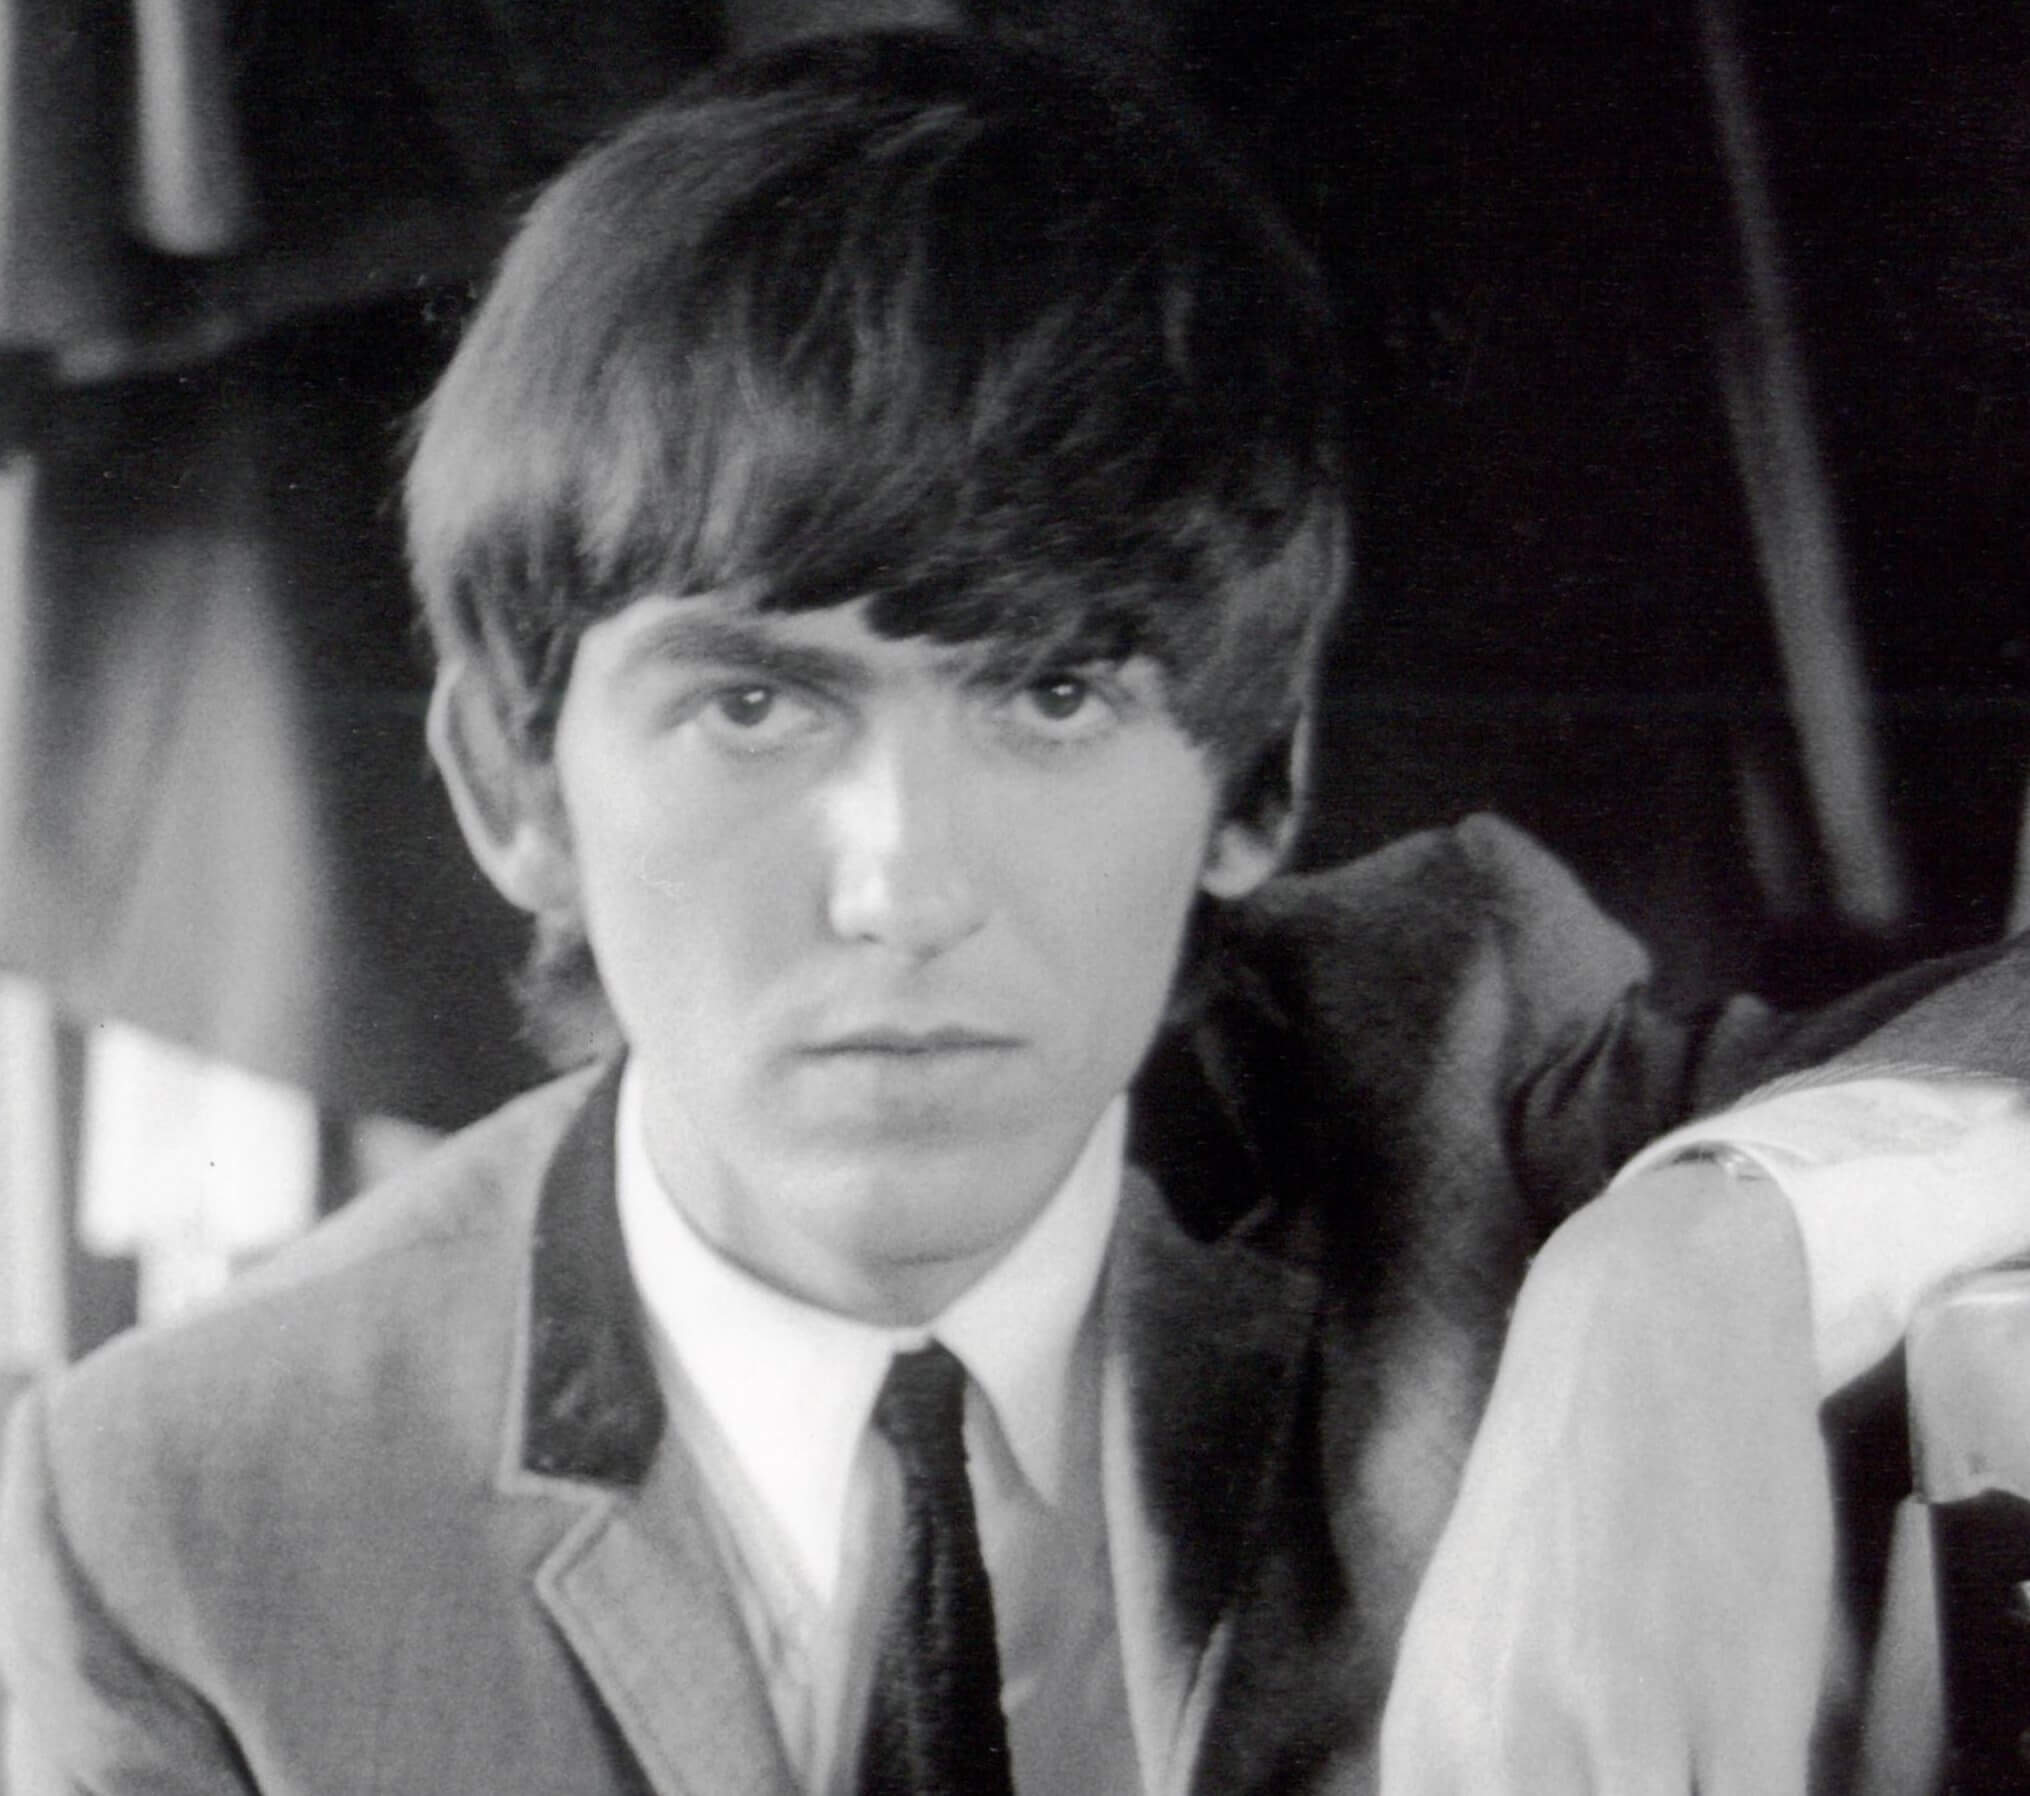 George Harrison, the inspiration behind Oasis' "Supersonic," in black-and-white